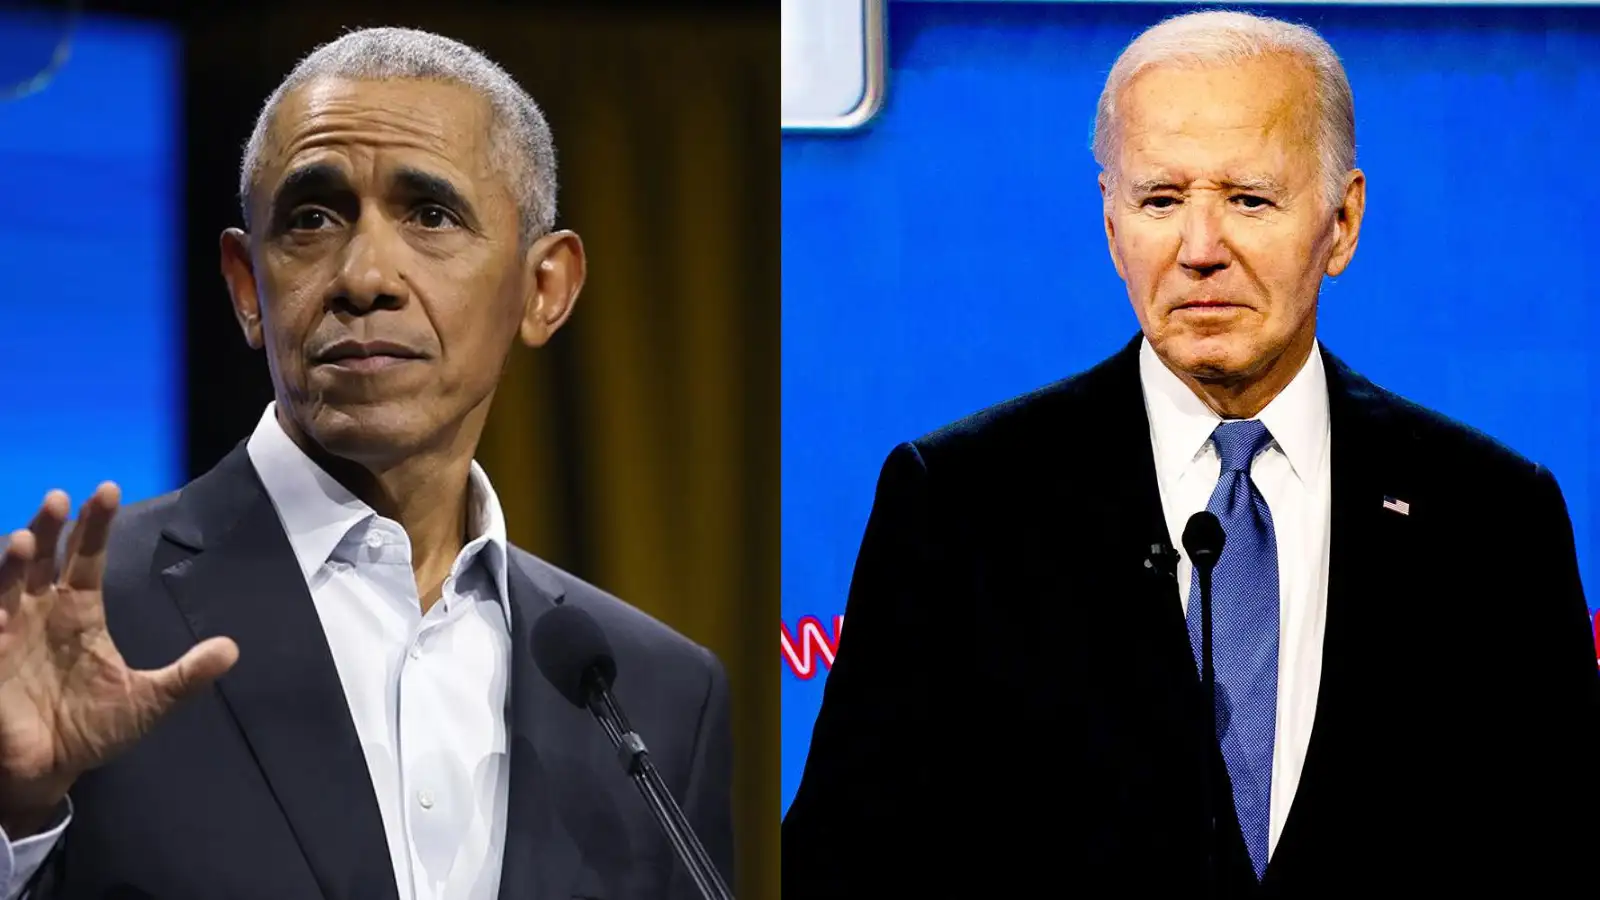 The Important Question Isn’t “Who is Replacing Biden?” The Life & Death Question We Should All Be Asking Is, “Who Is Running Our Country?”